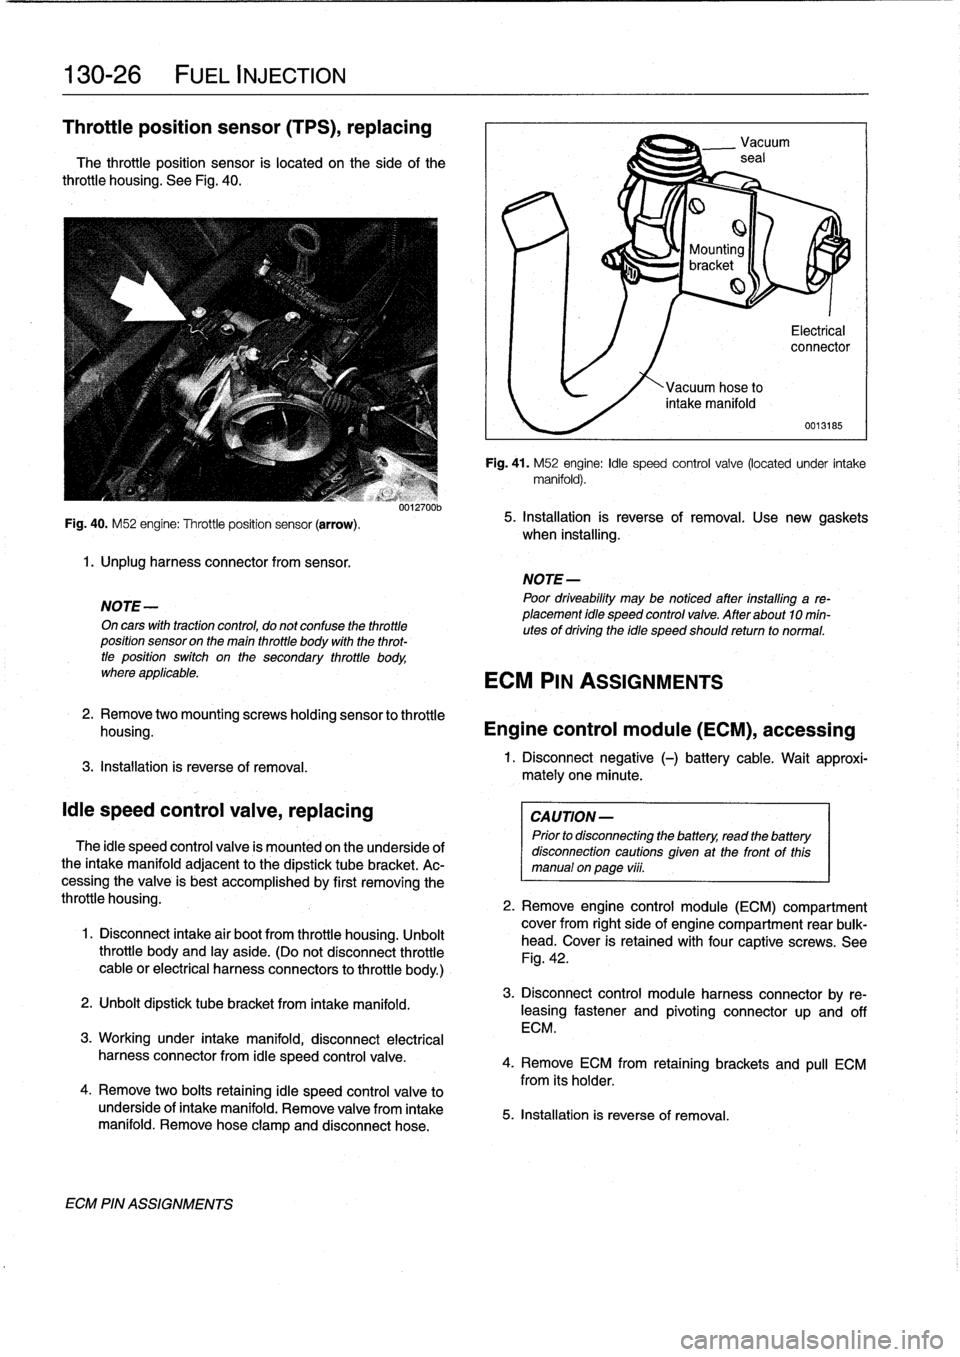 BMW 318i 1996 E36 Workshop Manual 
130-26

	

FUEL
INJECTION

Throttle
position
sensor
(TPS),
replacing

The
throttie
position
sensor
is
located
on
the
side
of
the
throttie
housing
.
See
Fig
.
40
.

Fig
.
40
.
M52
engine
:
Throttle
po